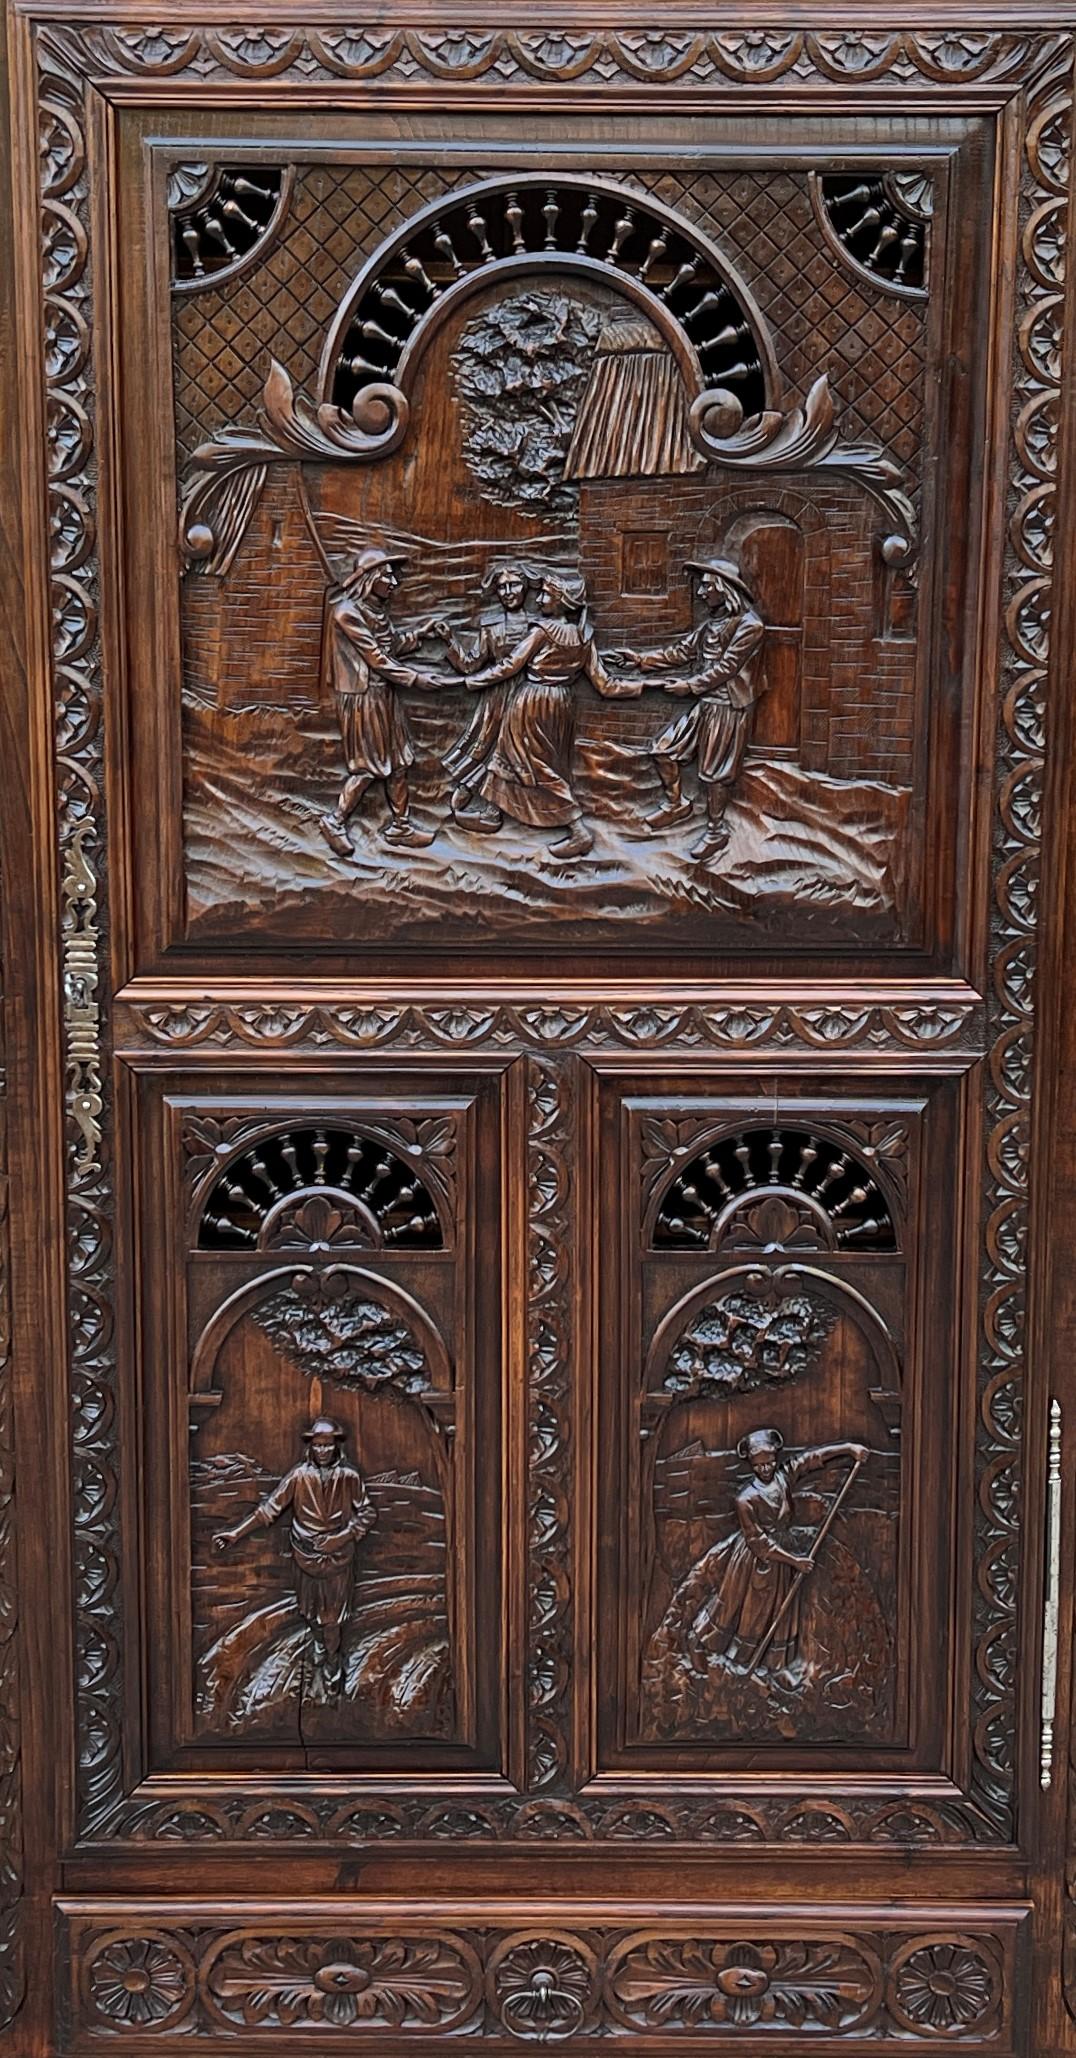 BEAUTIFUL 19th century Antique French Oak BRETON Brittany Cabinet, Armoire, Wardrobe, or Bonnetiere with Lower Drawer, Key, and 4 Interior Shelves.
~~c. 1880s

Charming carved oak cabinet or 